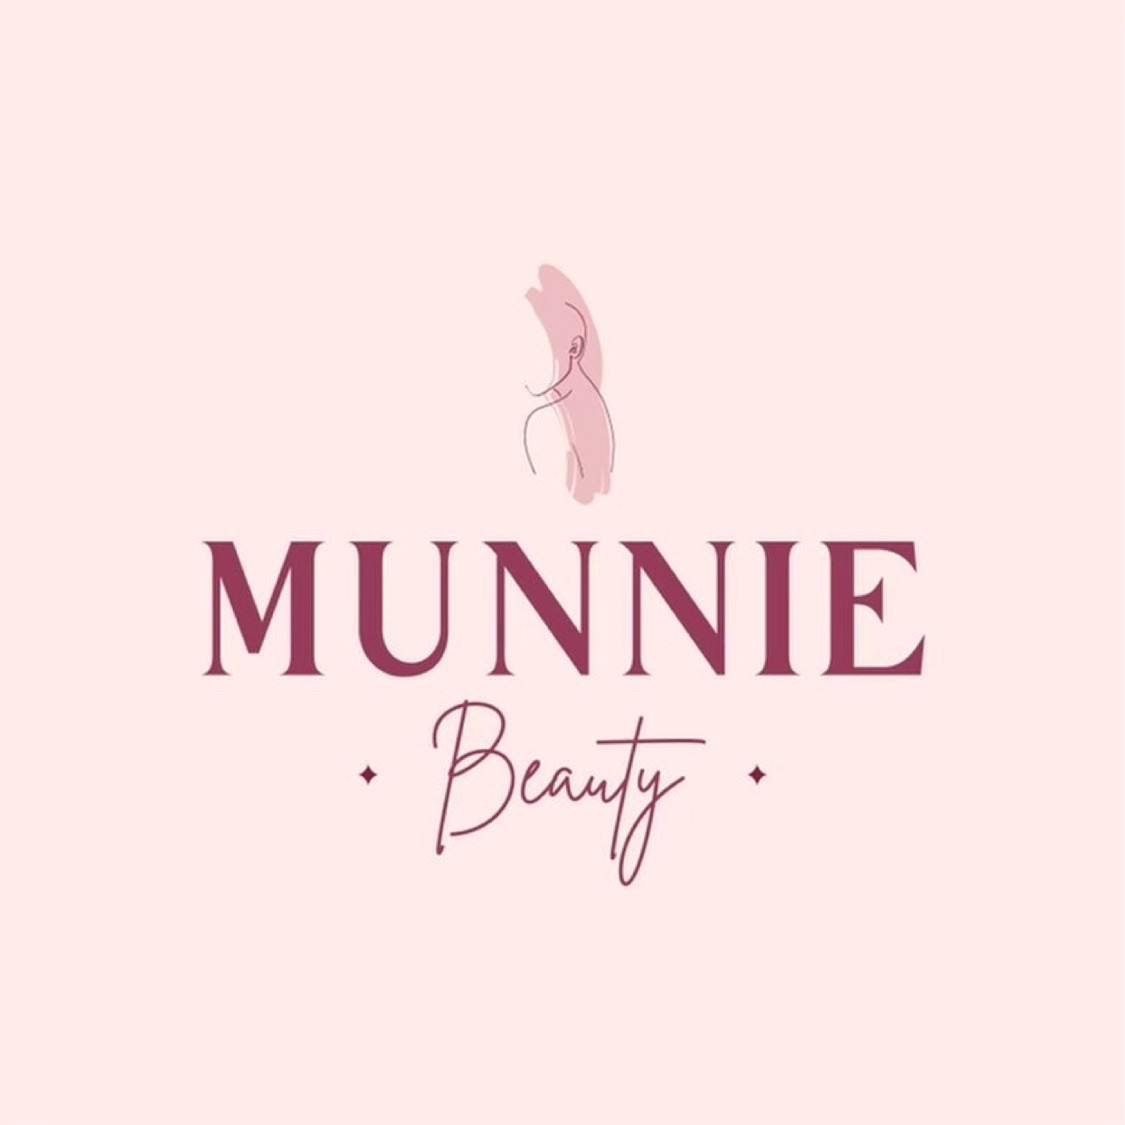 Munnie Beauty - Only Authentic